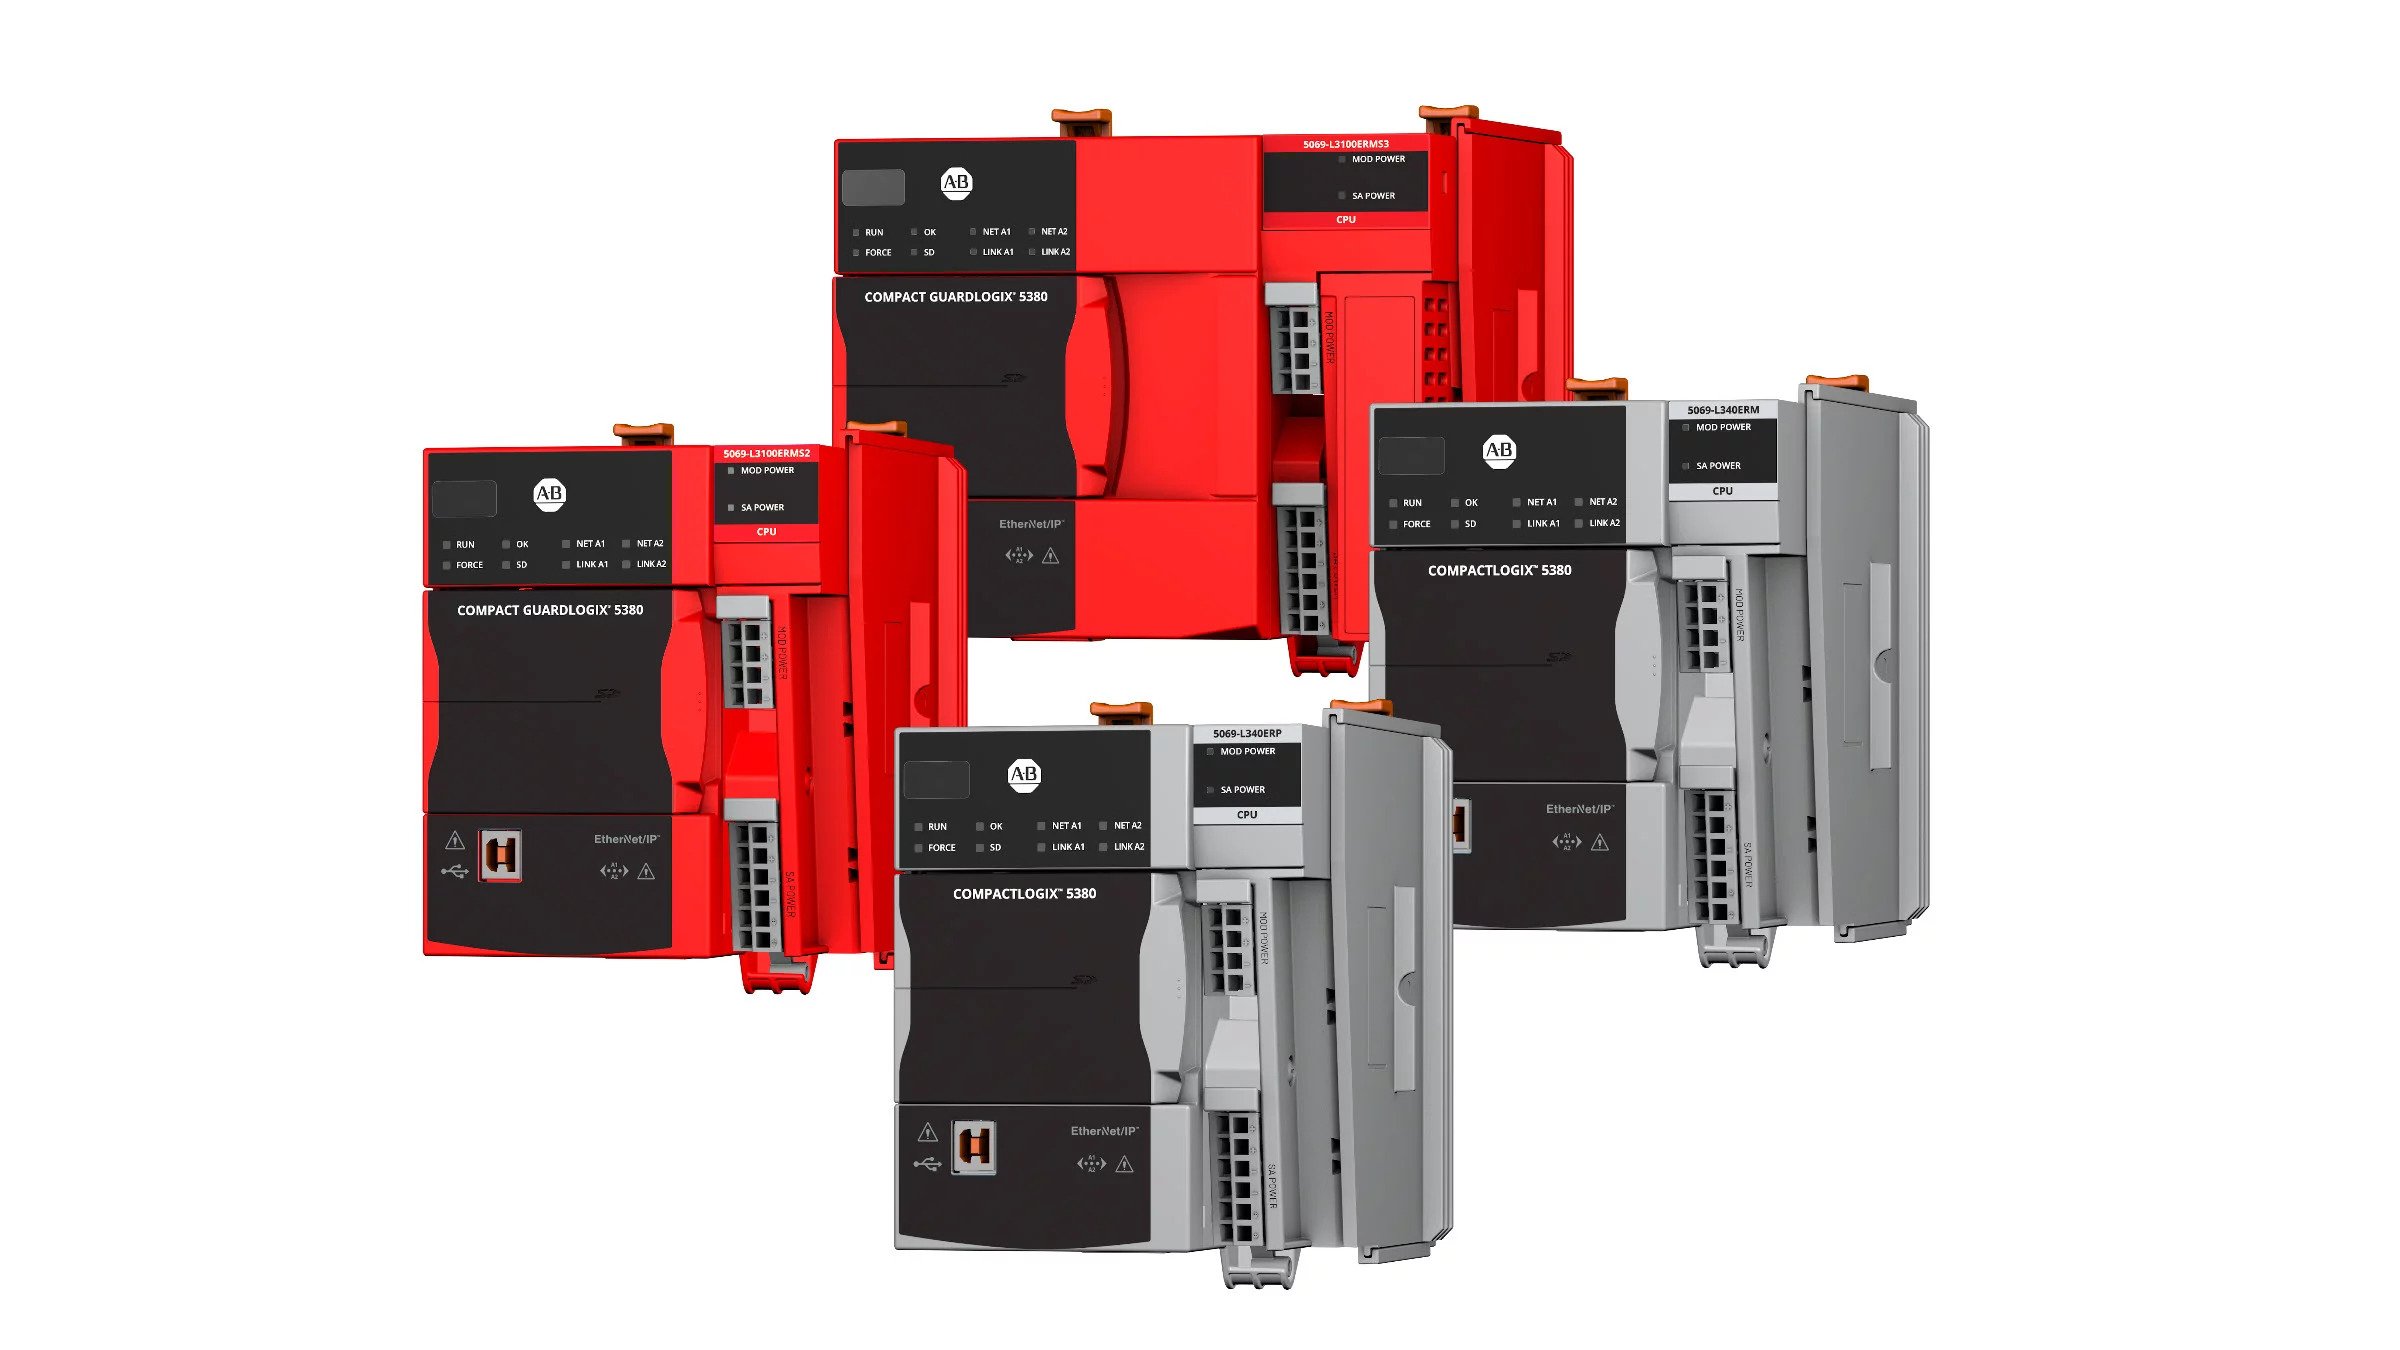 The edgeConnector Allen-Bradley PLC can access data from any ControlLogix or CompactLogix controller. This image features CompactLogix 5380 controllers